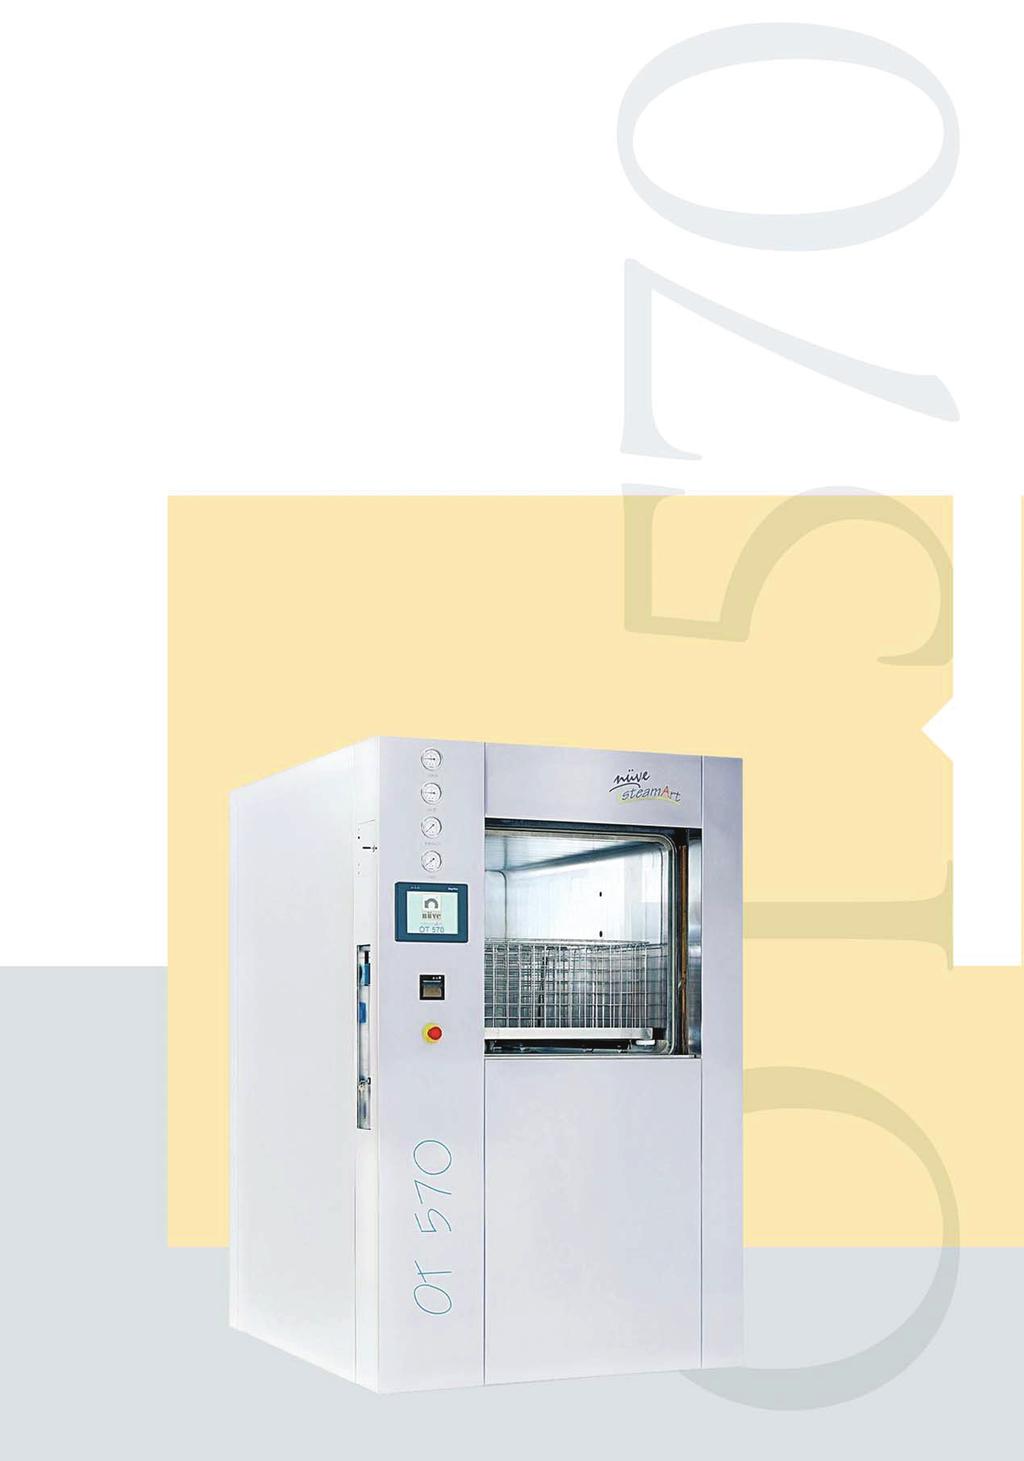 OT 300 / 430 / 570 STEAM STERILIZERS Conforms to the requirement of EN 285 European Standard for Large Steam Sterilizers. Chamber and STU capacity : OT 300: 300 liters, 4 pcs.